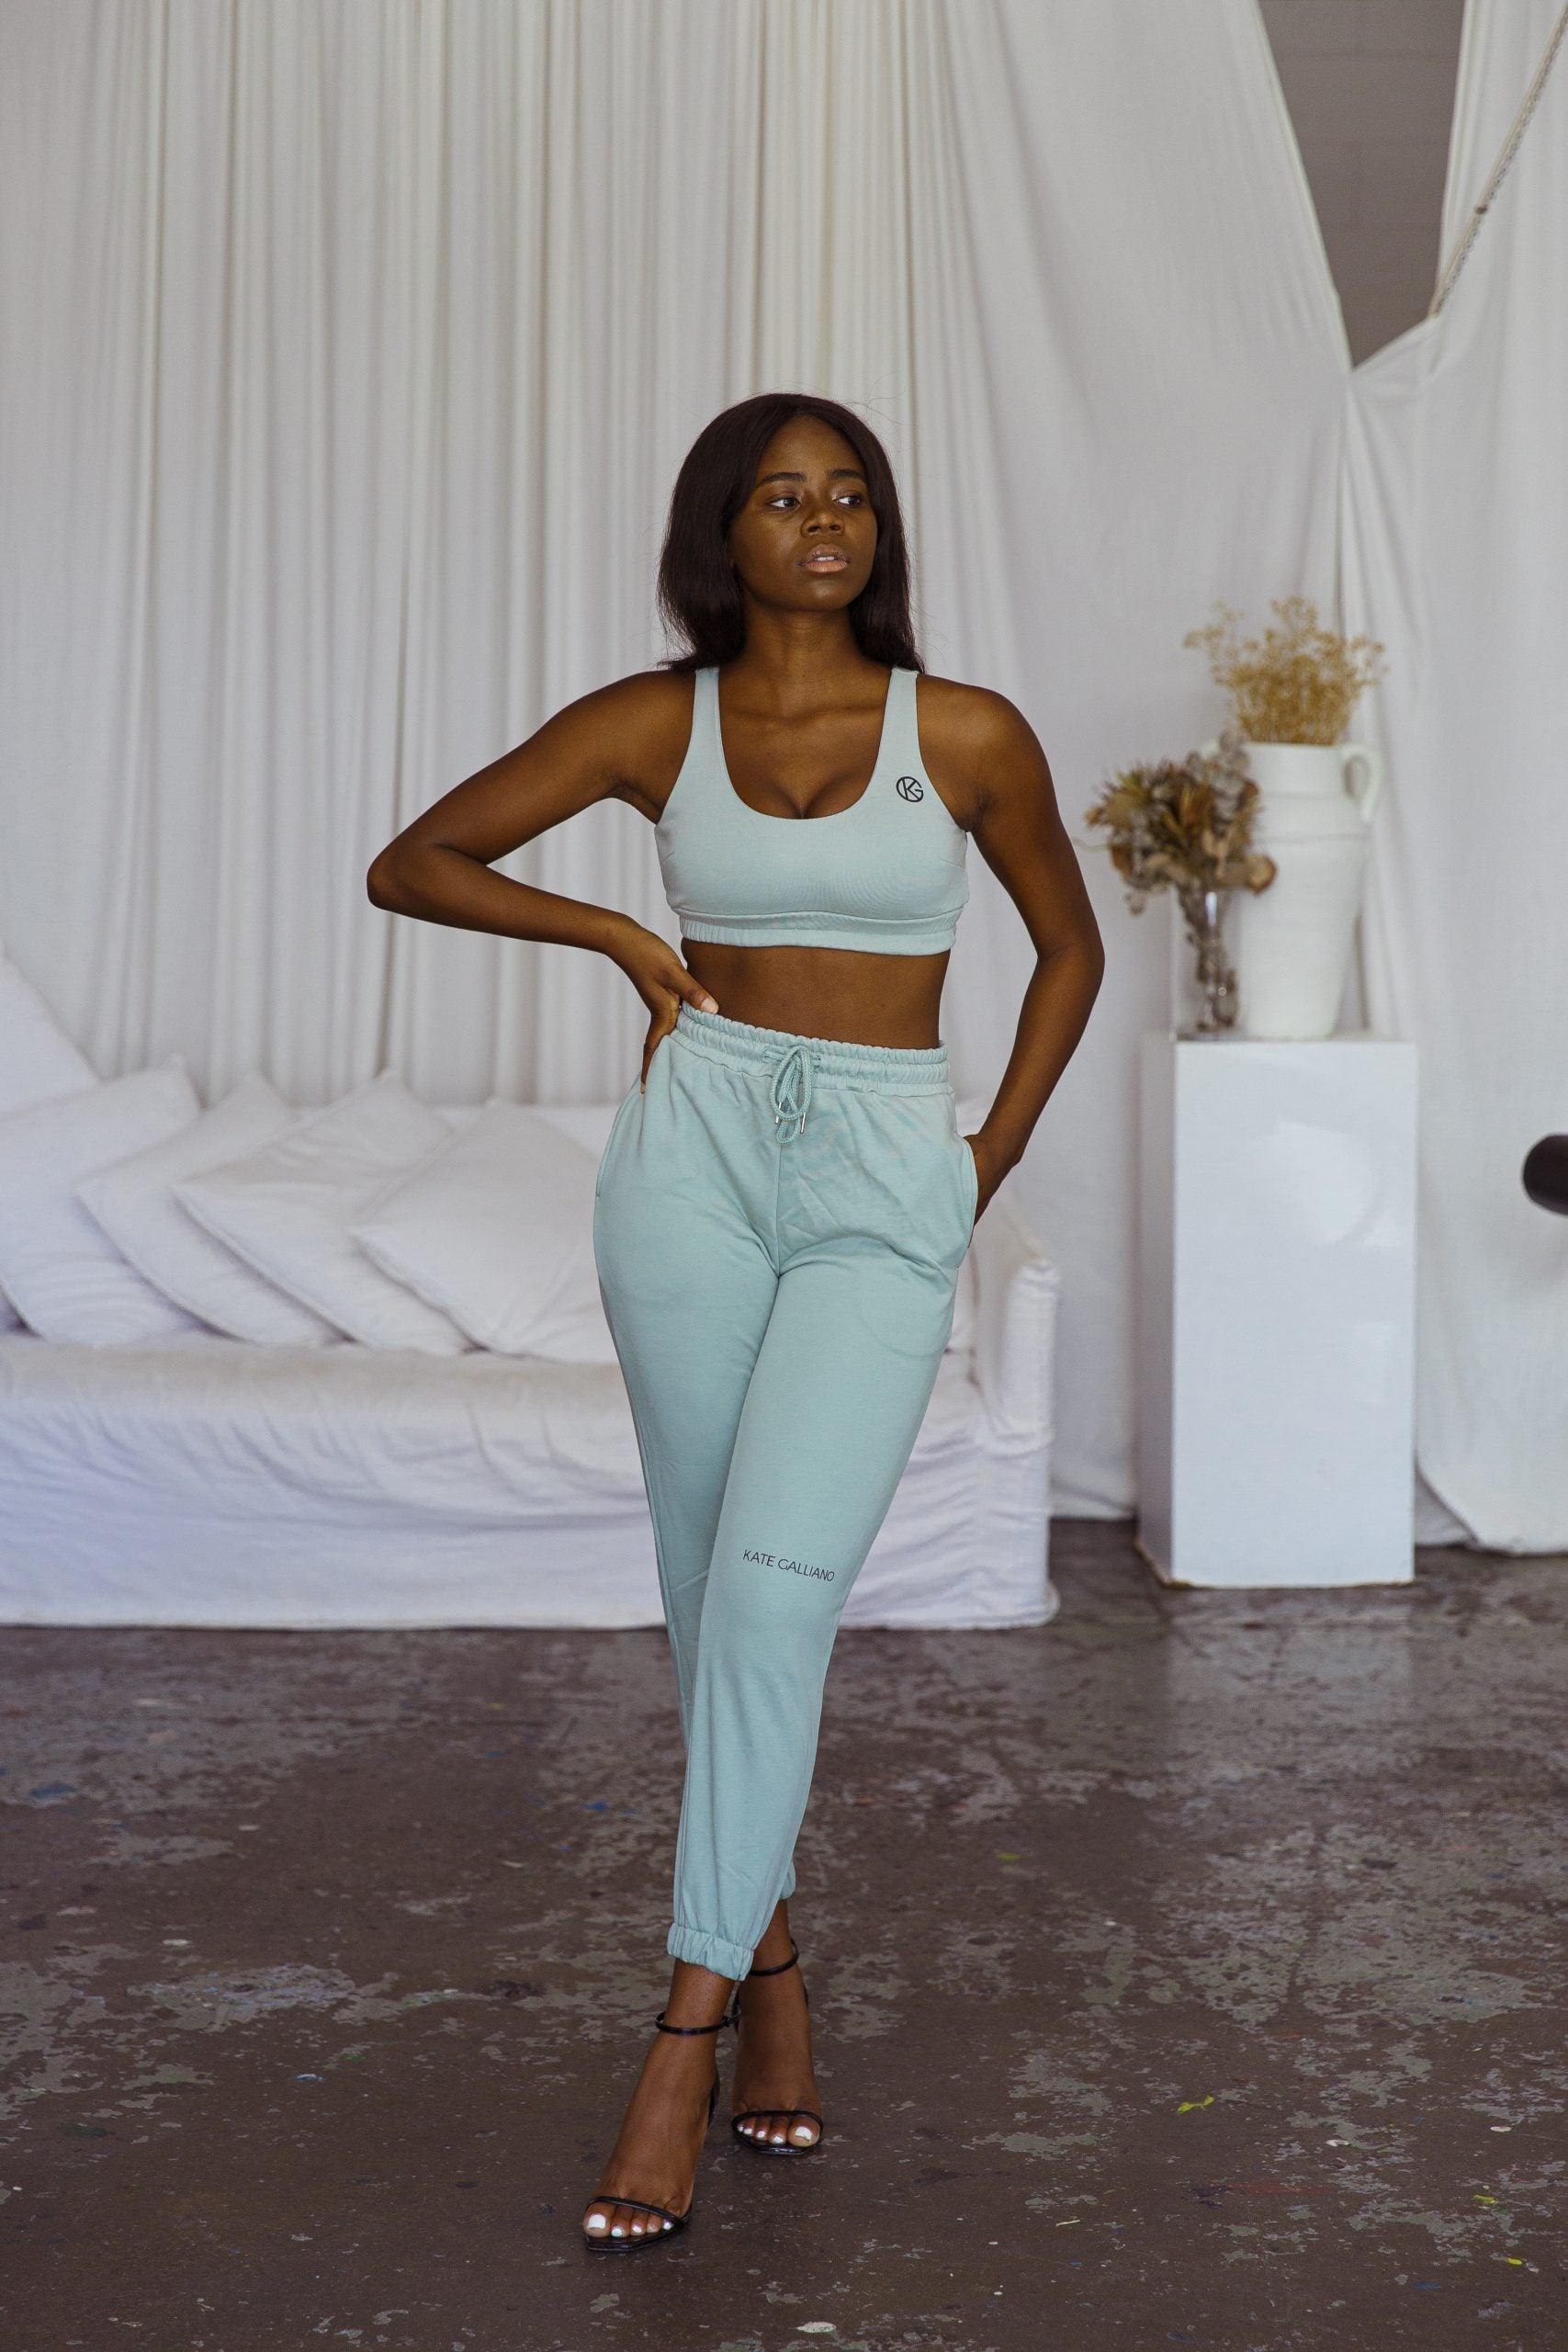 kg lounge collection - sage crop top - women's sports top - workout crop top - kate galliano activewear